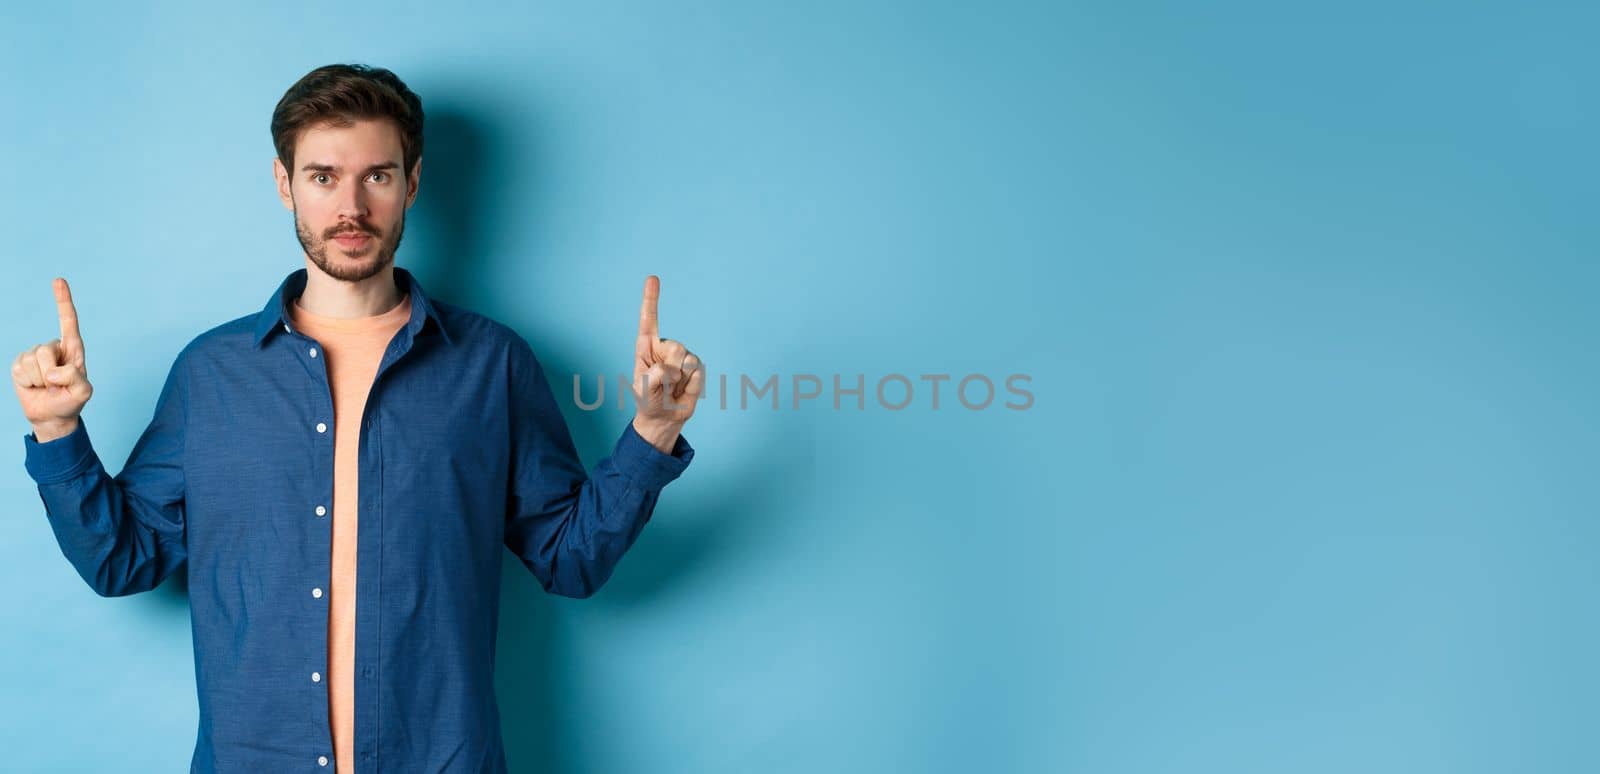 Serious caucasian man with beard pointing fingers up at empty space, showing logo and looking at camera, standing on blue background.